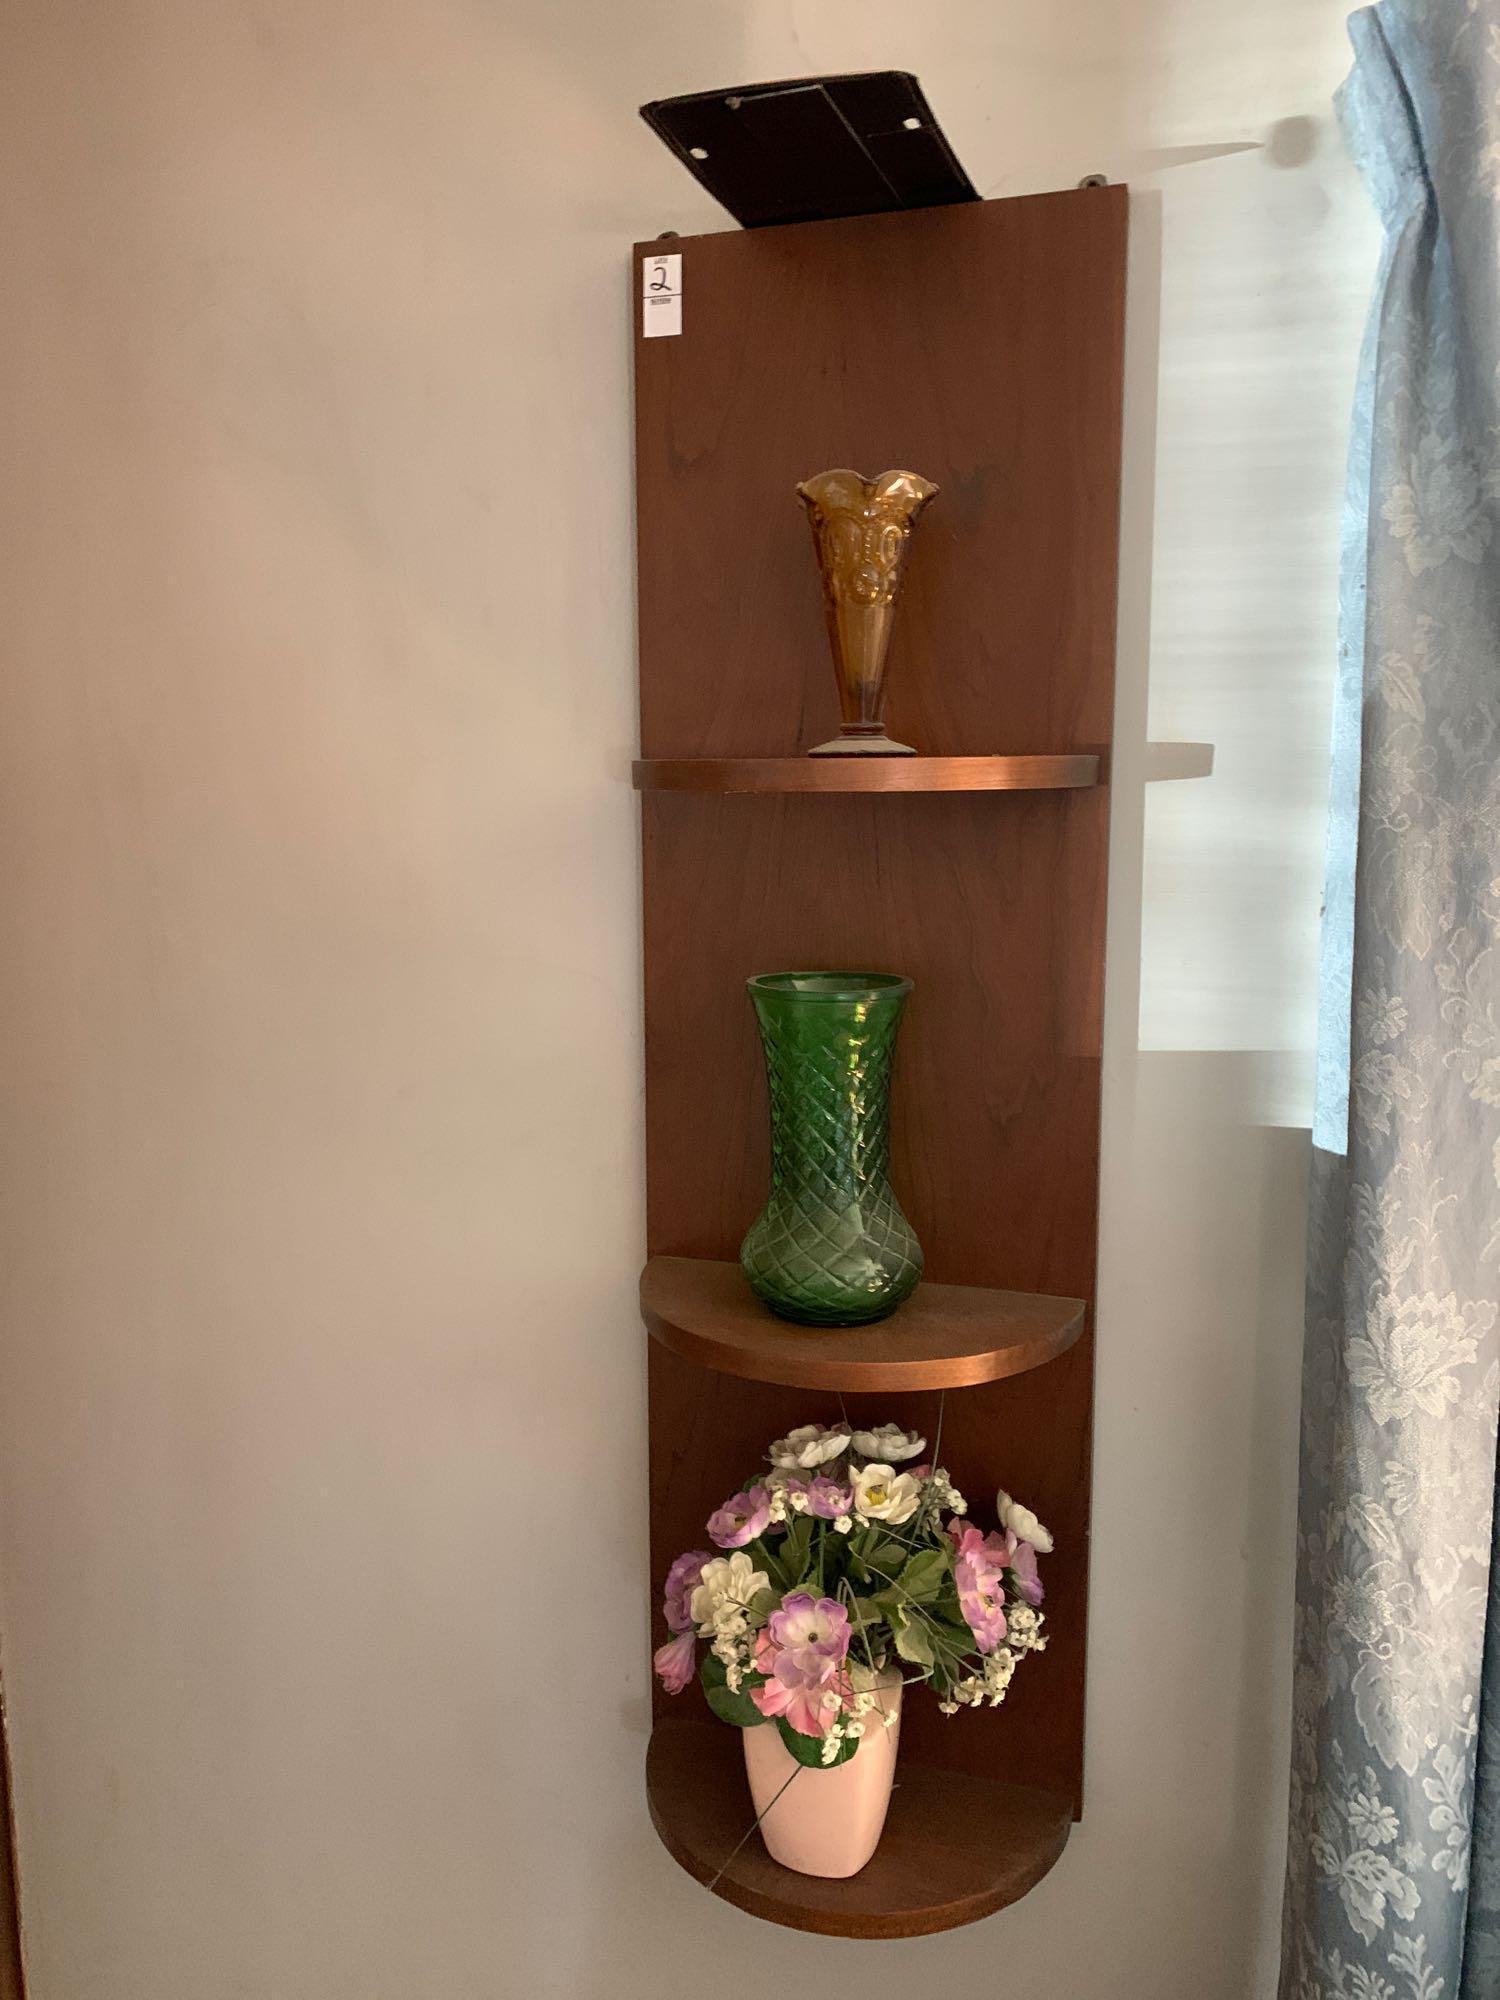 Pair of Wall Hanging Shelves and Contents